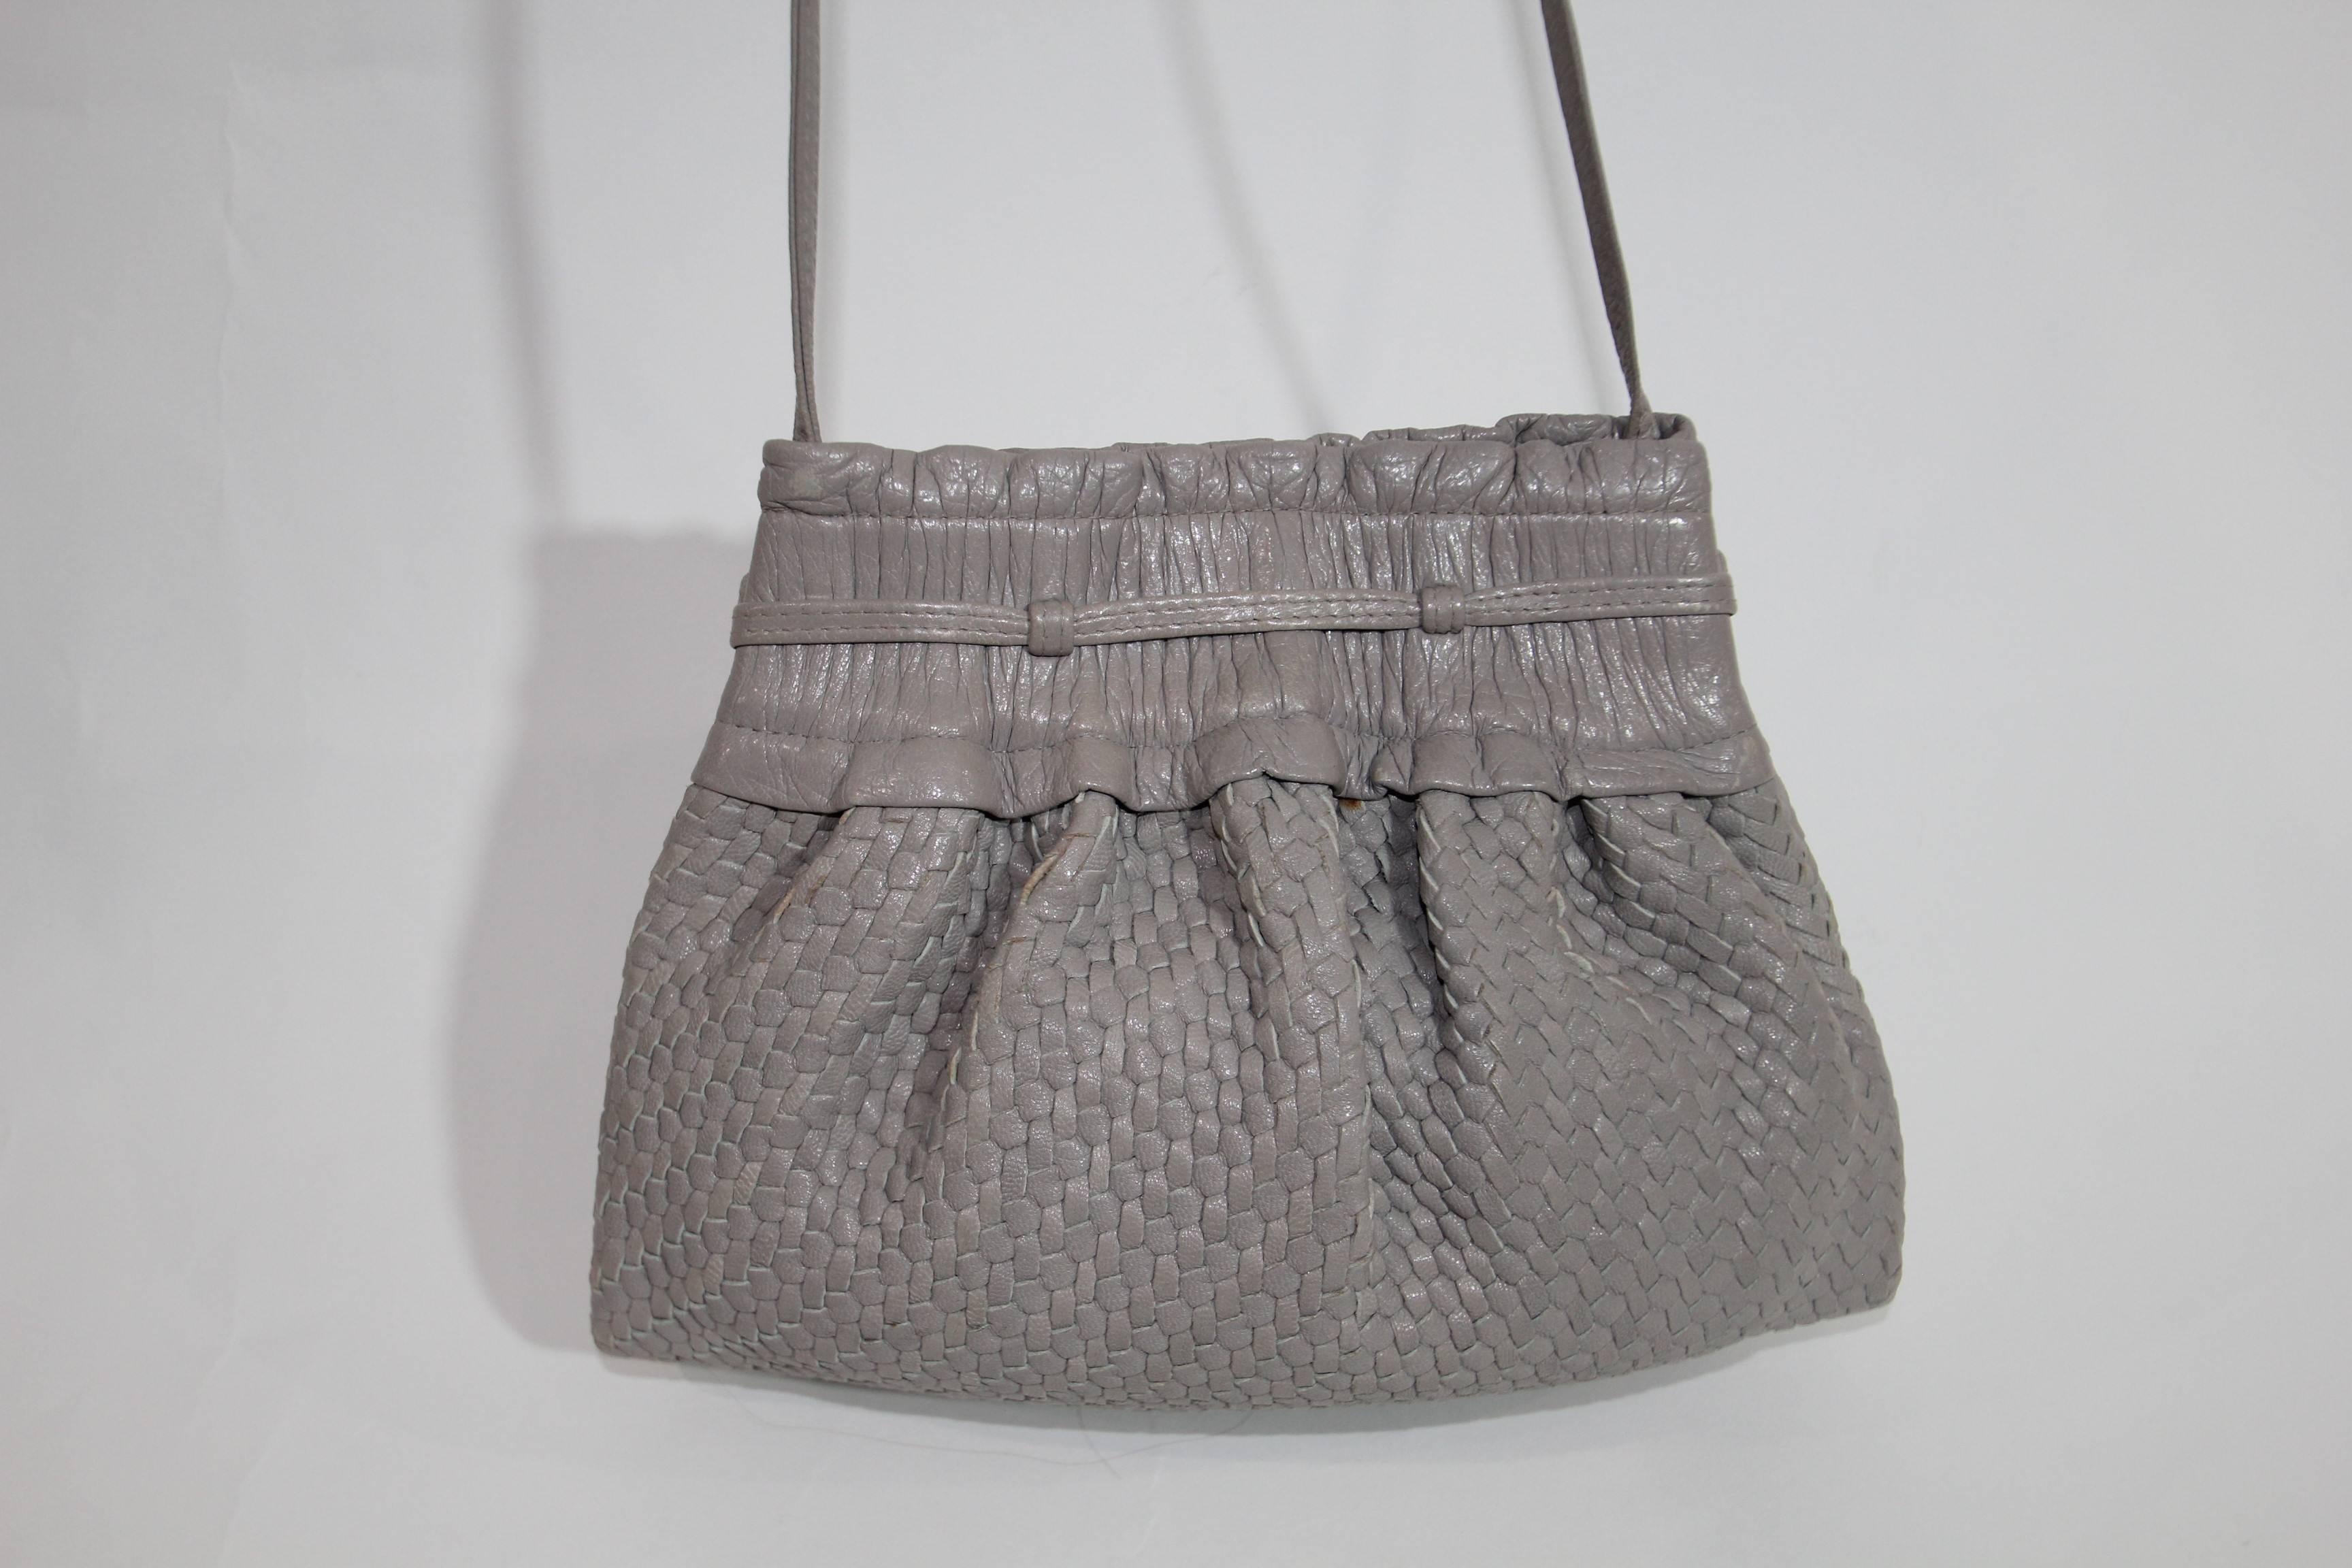 Perfect every day or for the night on the town Fendi Vintage woven cross body  leather bag . Light grey color. Snap closure. Fendi insignia lining. One zipper pocket. Excellent condition. Very soft . 
Mesures 10